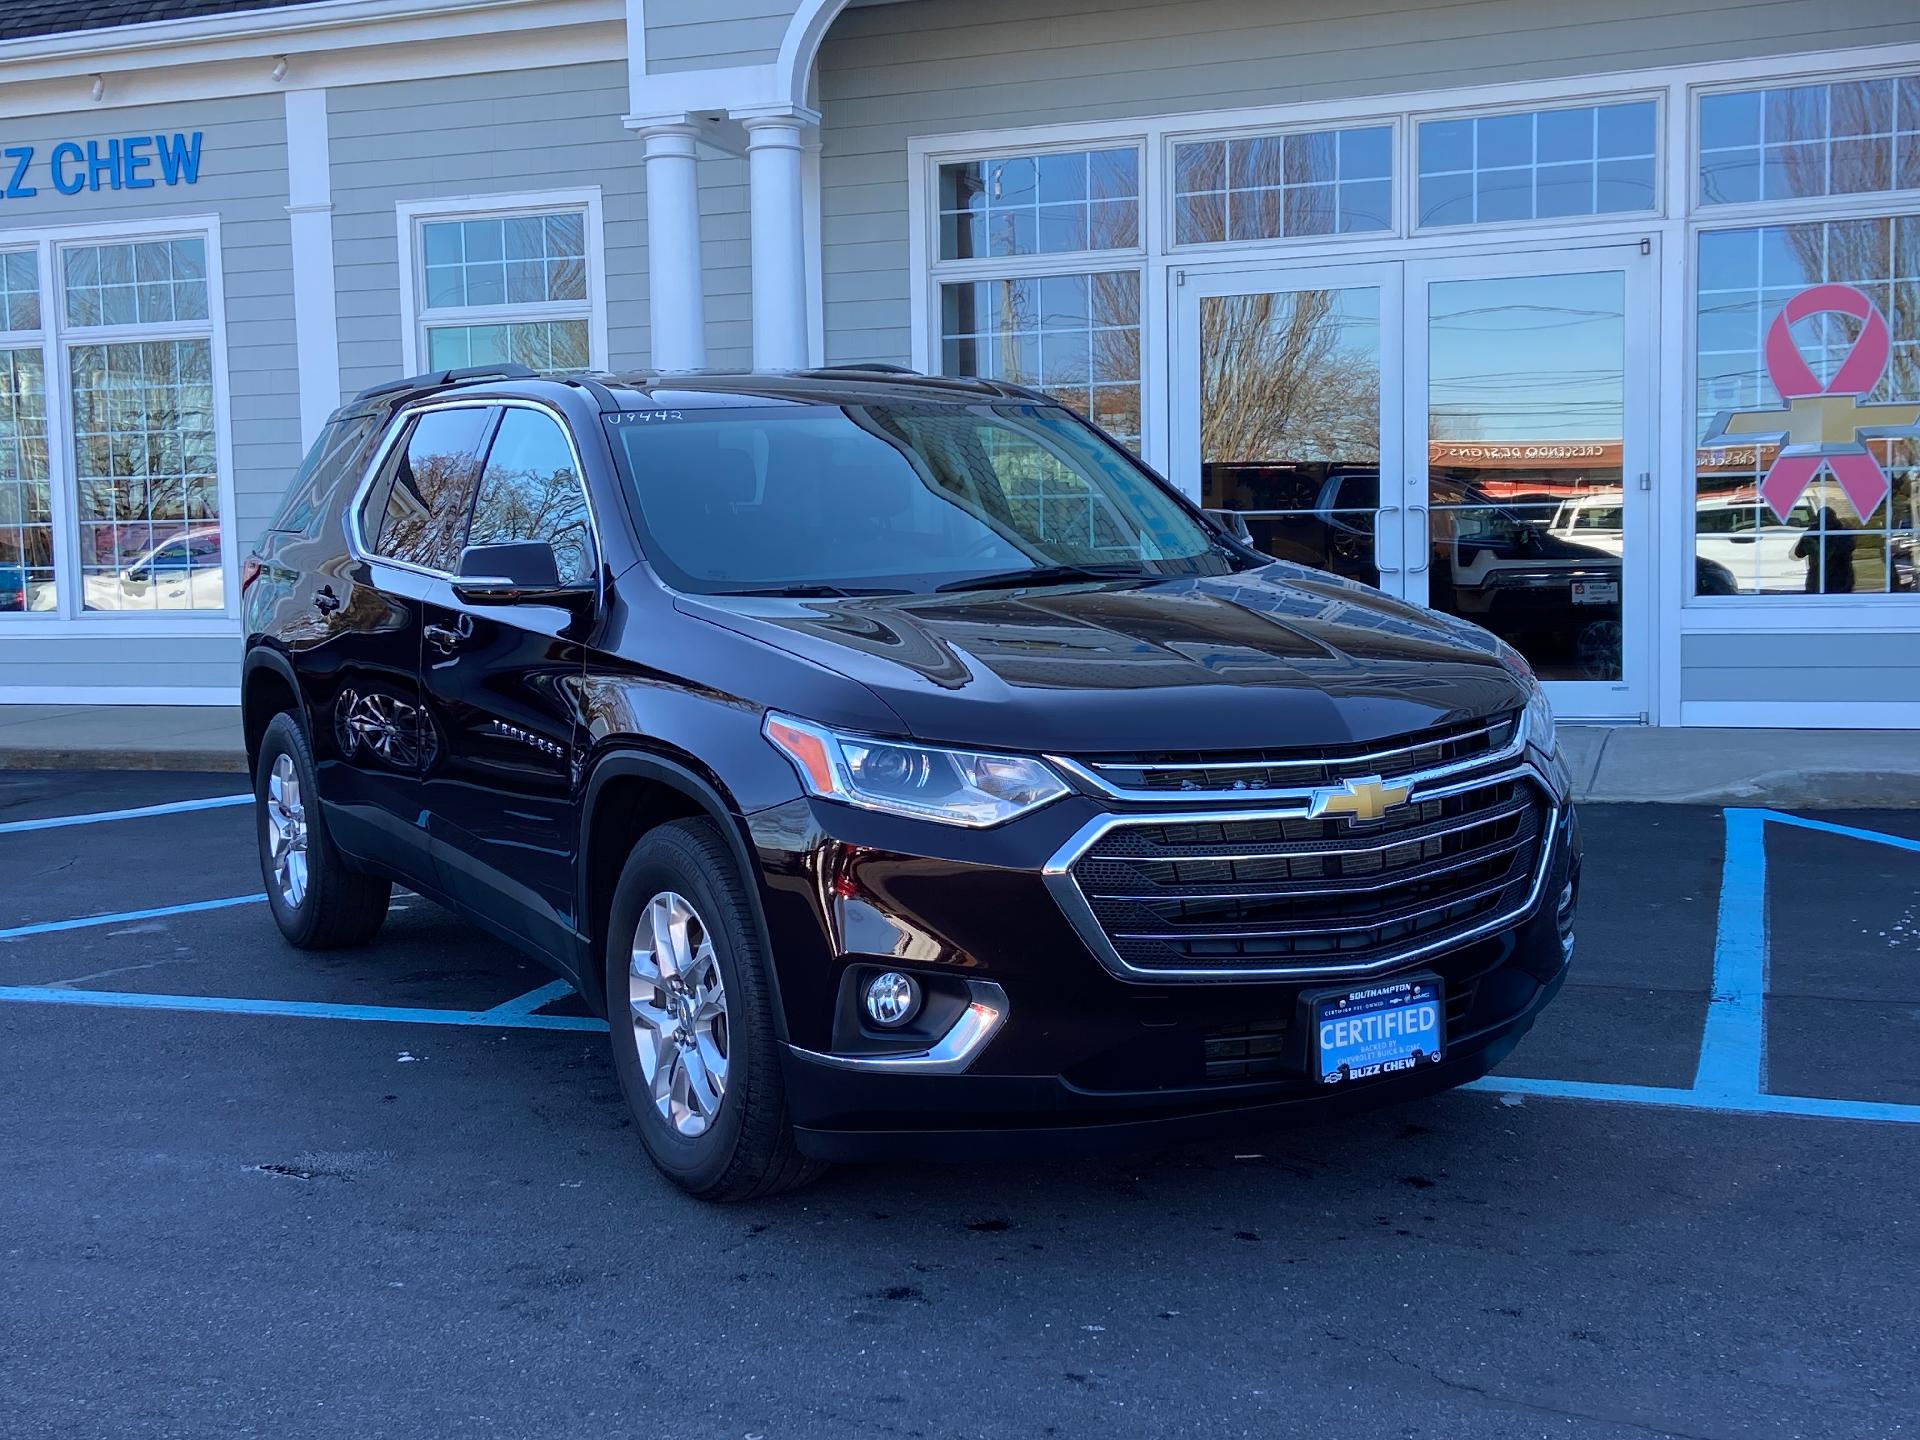 Certified 2021 Chevrolet Traverse for Sale at Buzz Chew Chevrolet